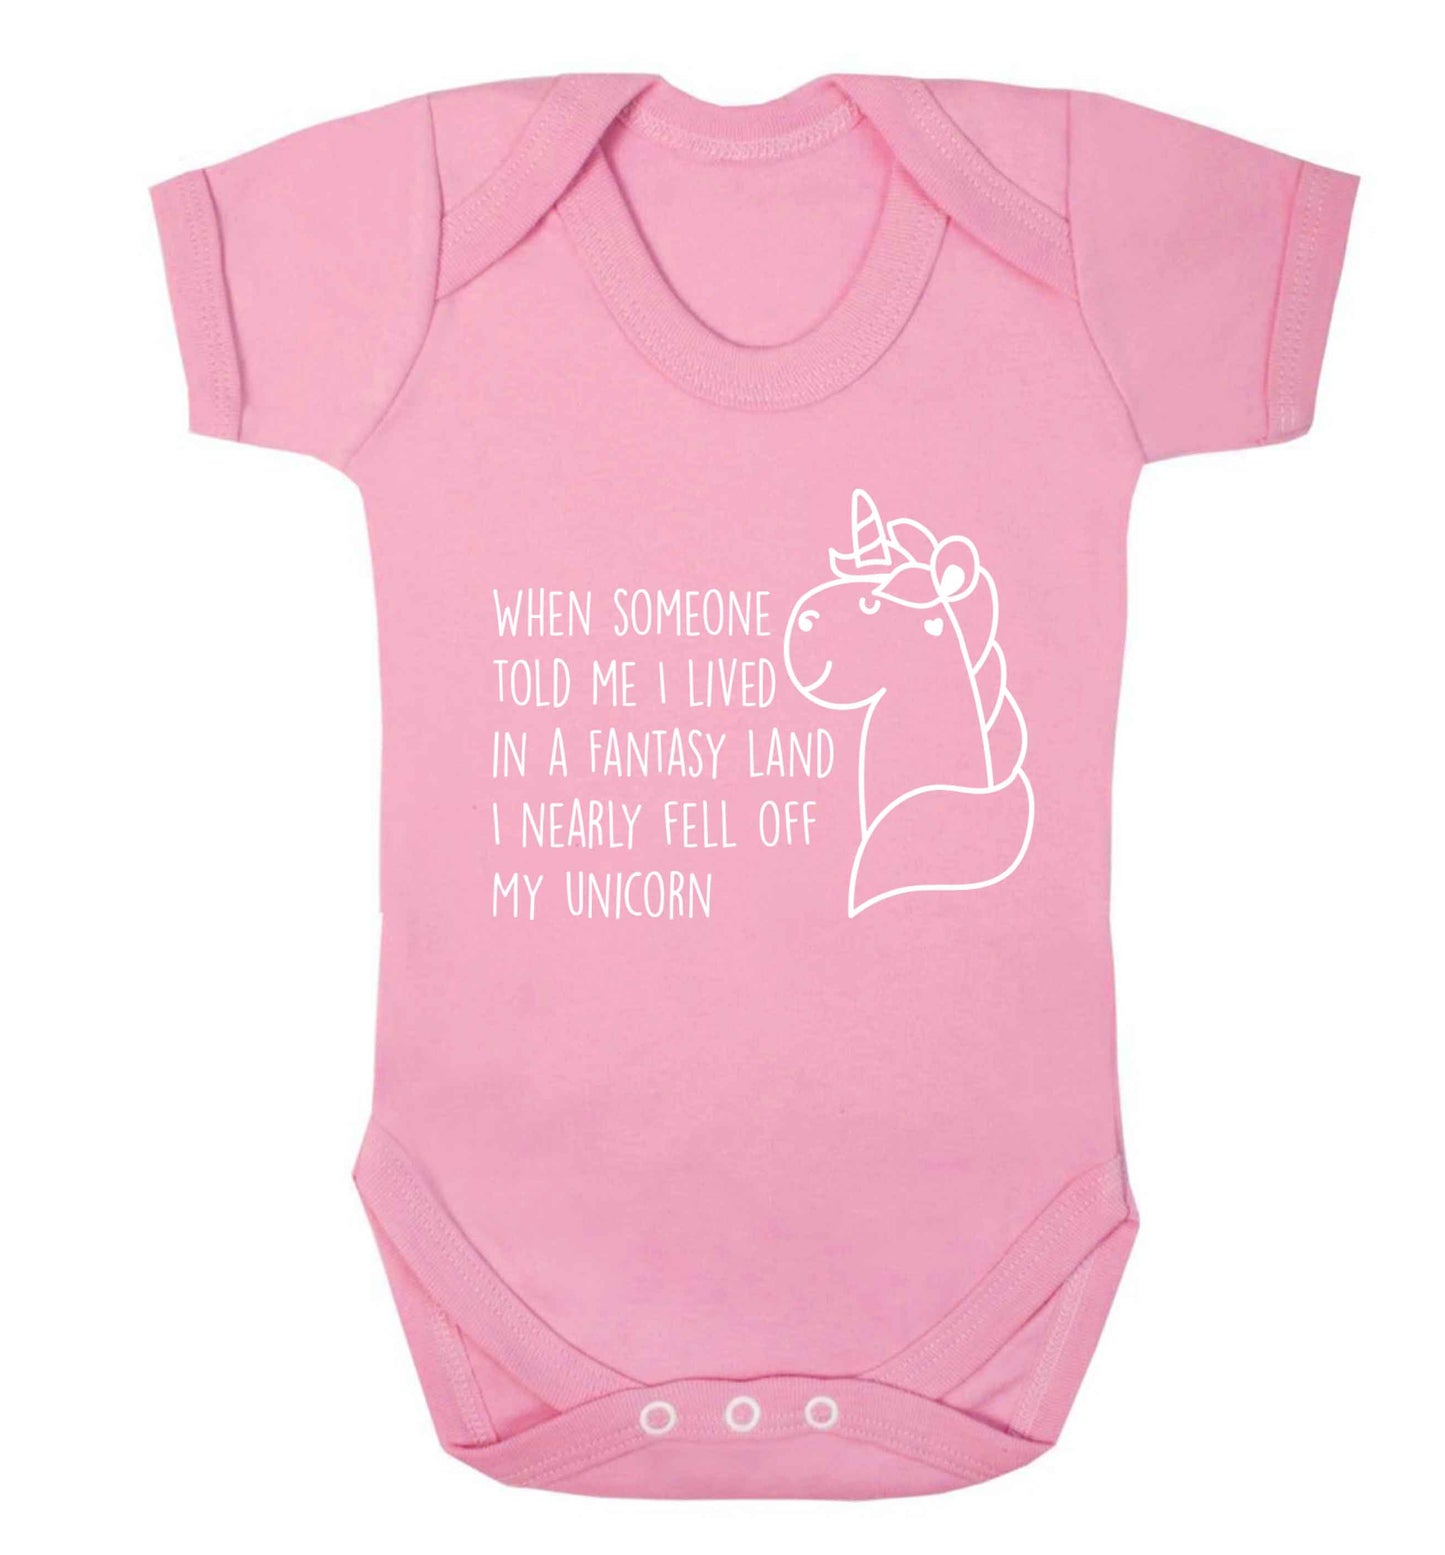 When somebody told me I lived in a fantasy land I nearly fell of my unicorn Baby Vest pale pink 18-24 months